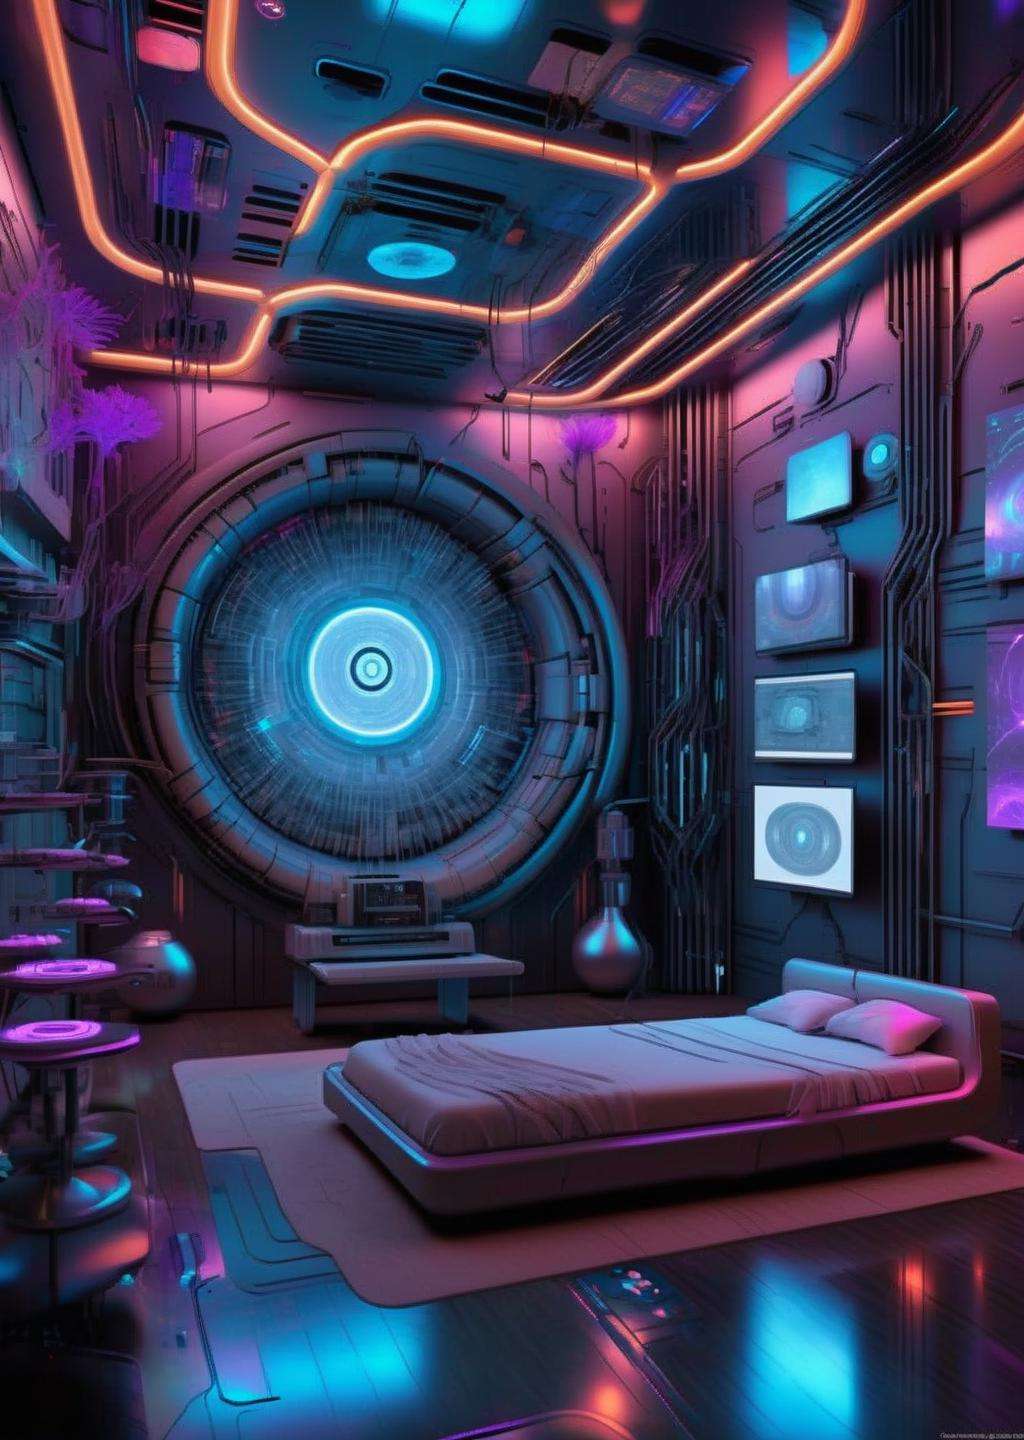 ((magazine photography)) , Brainwave lounge, neural resonators, meditative pods, synaptic harmonics, immersive neural soundscapes, transcendental experiences in data-encoded tranquility. ,  cgstudio, computer graphics, space art , cyberpunk ambient, a room<lora:cyber_room_sdxl:1.0>